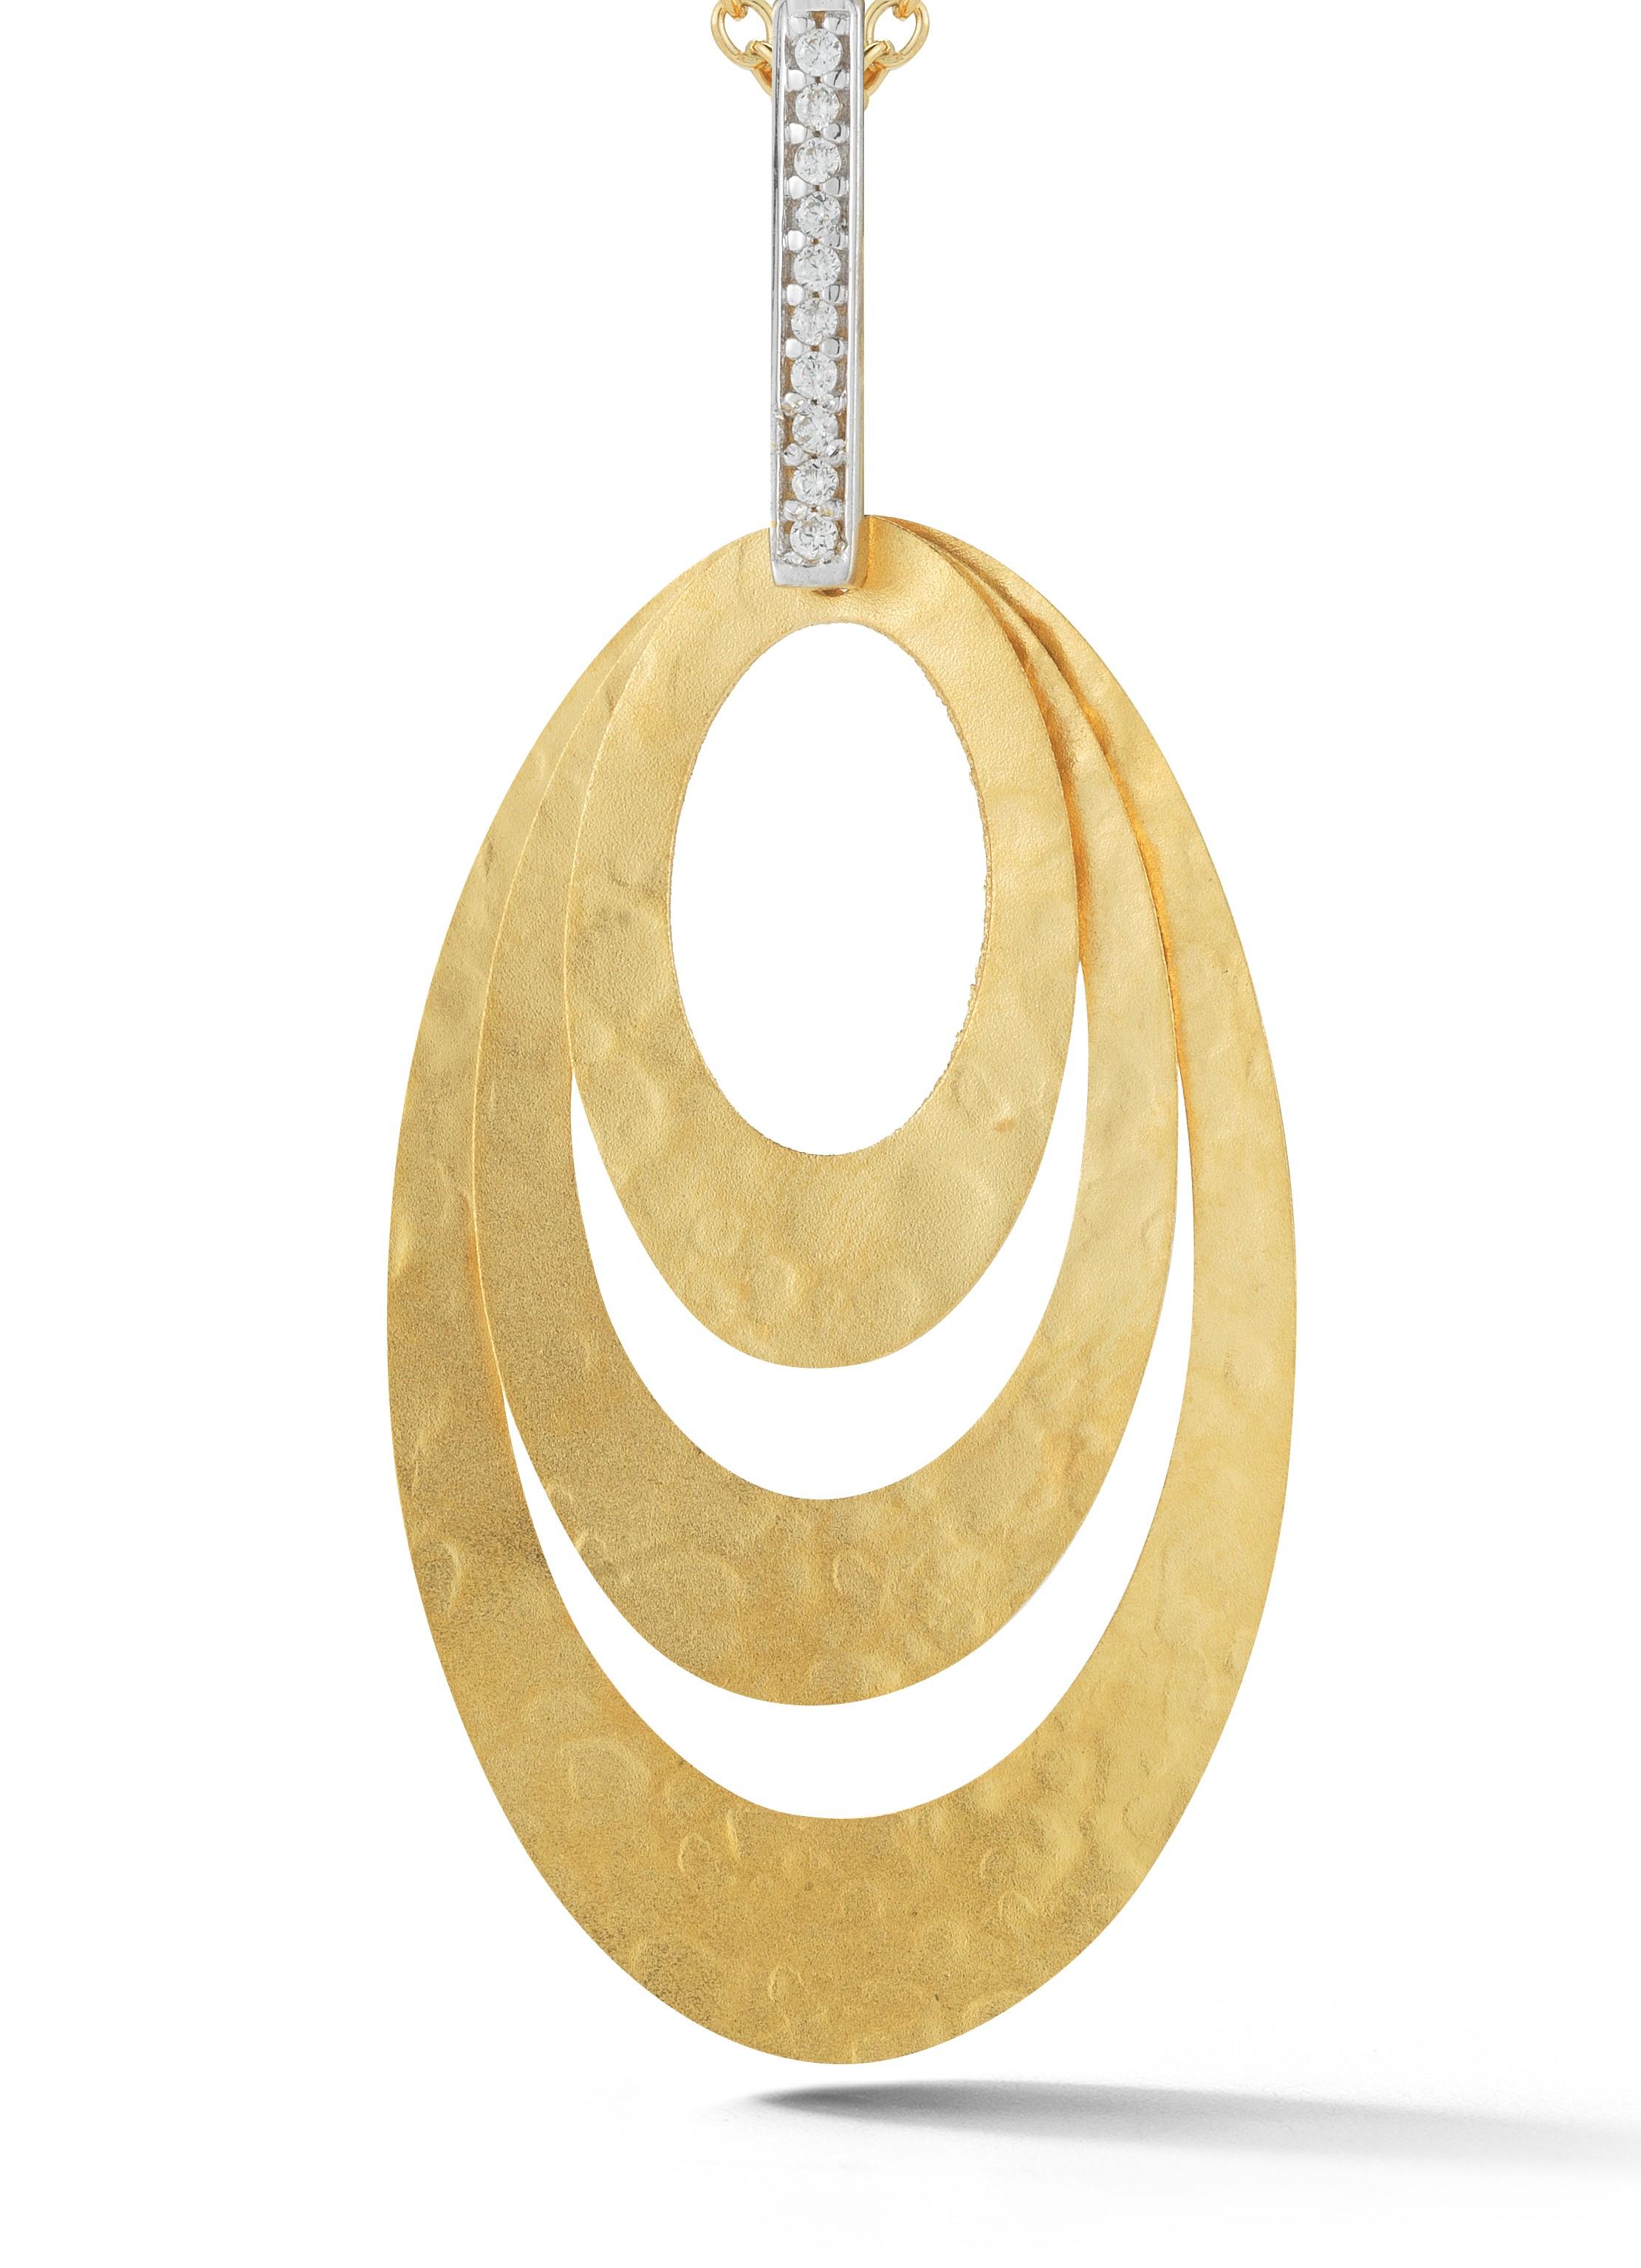 14 Karat Yellow Gold Matte and Hammered-Finished Movable Concentric-Ovals Pendant, Accented with 0.06 Carats of a Pave Set Diamond Extender, Sliding on a 16